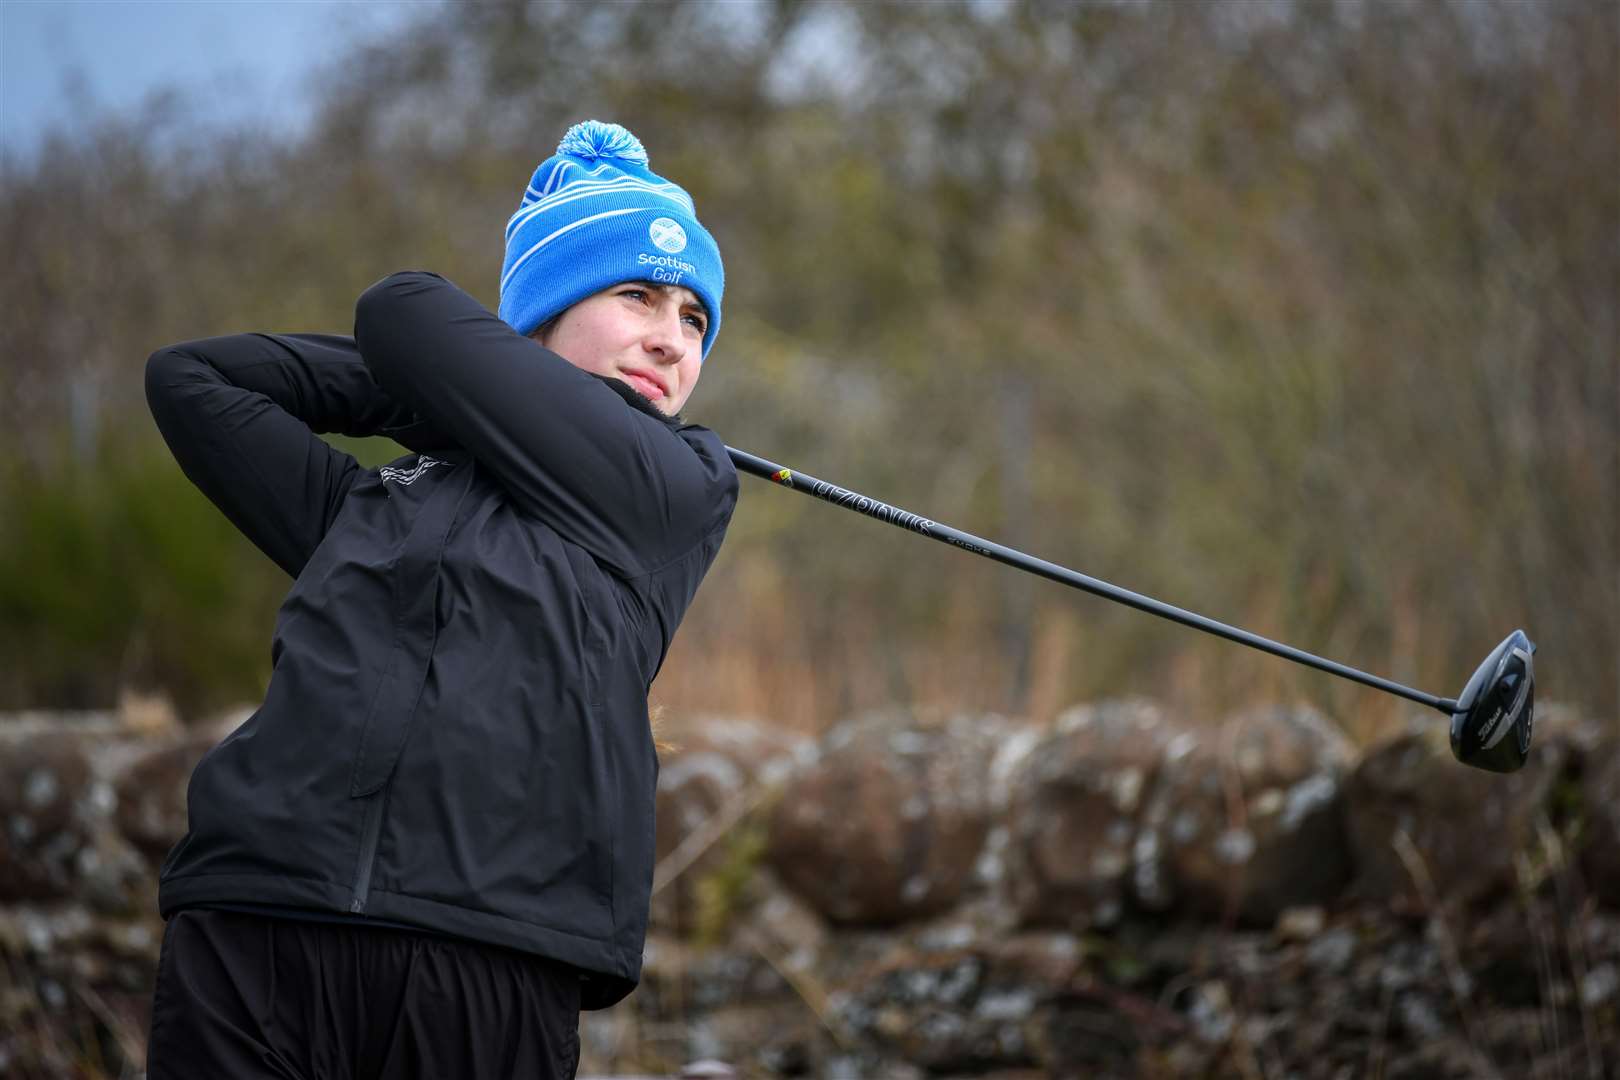 Summer Elliott hits a drive during the 2022 Scottish Girls' Open at Irvine Golf Club on April 6, 2022..